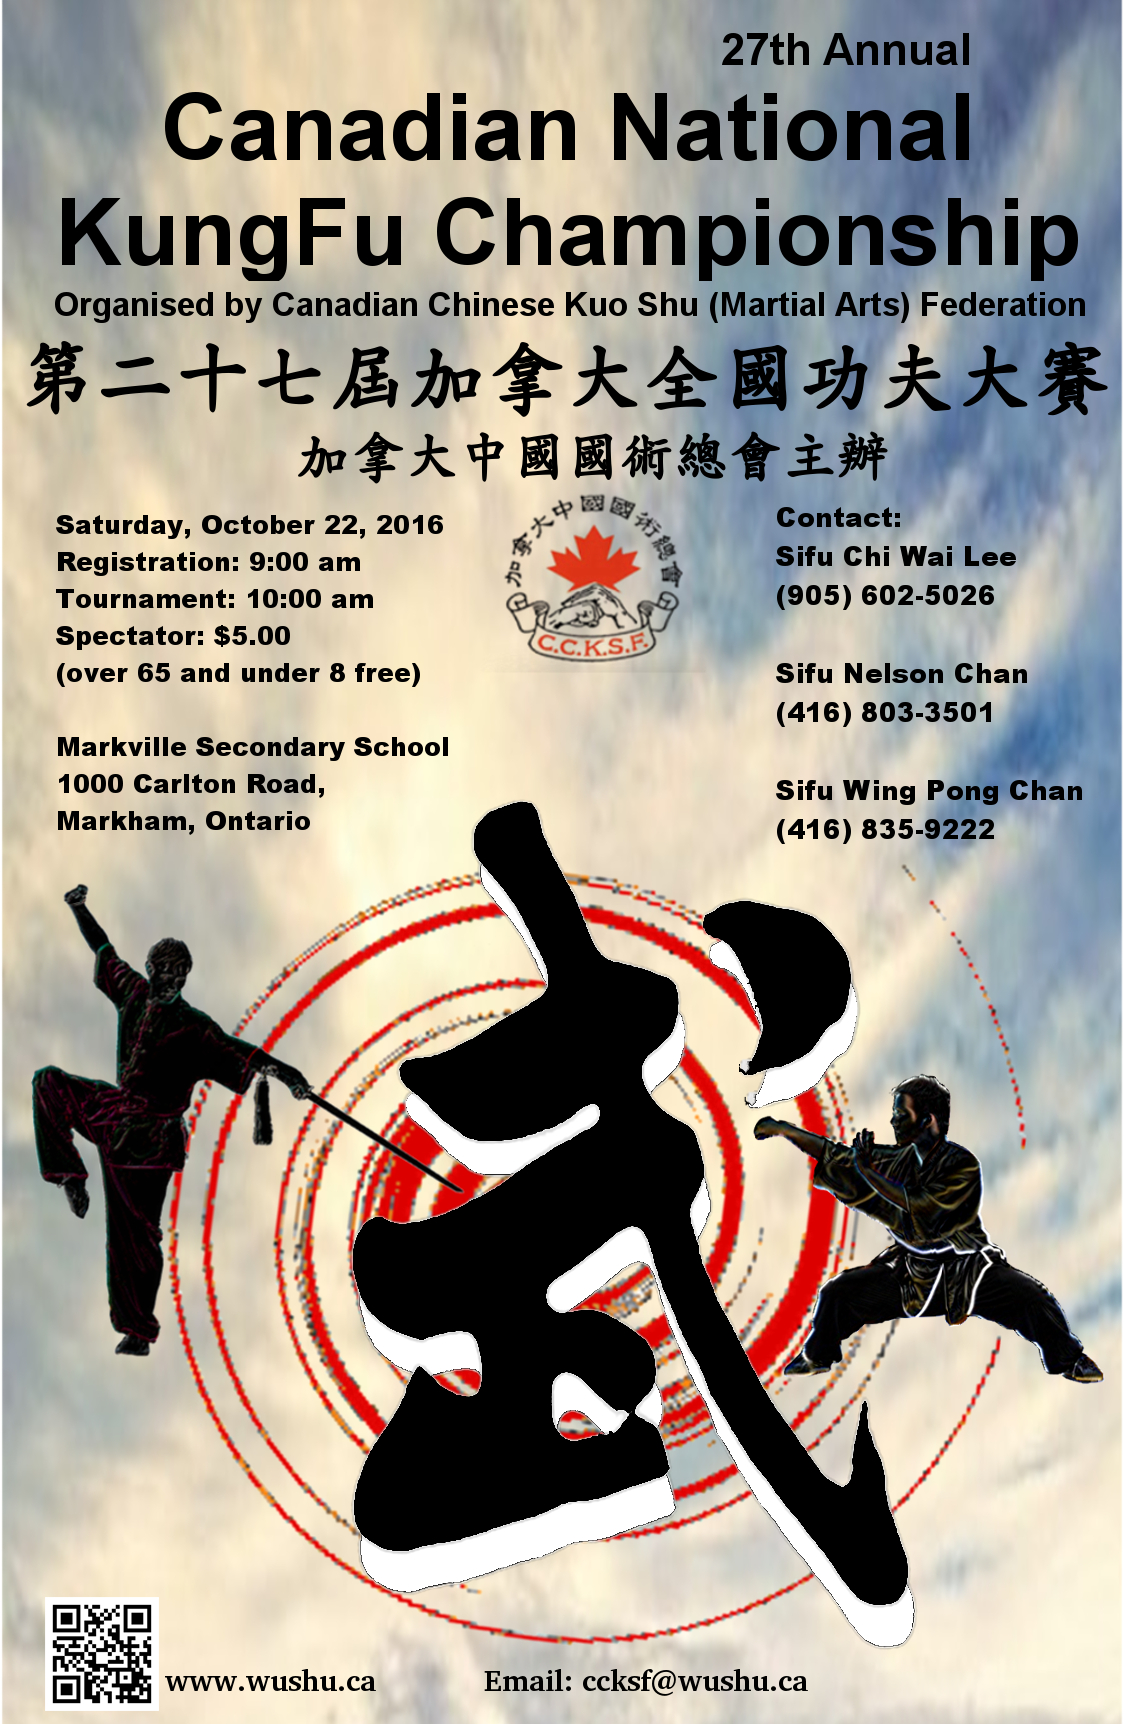 26th-annual-canadian-national-kungfu-championship